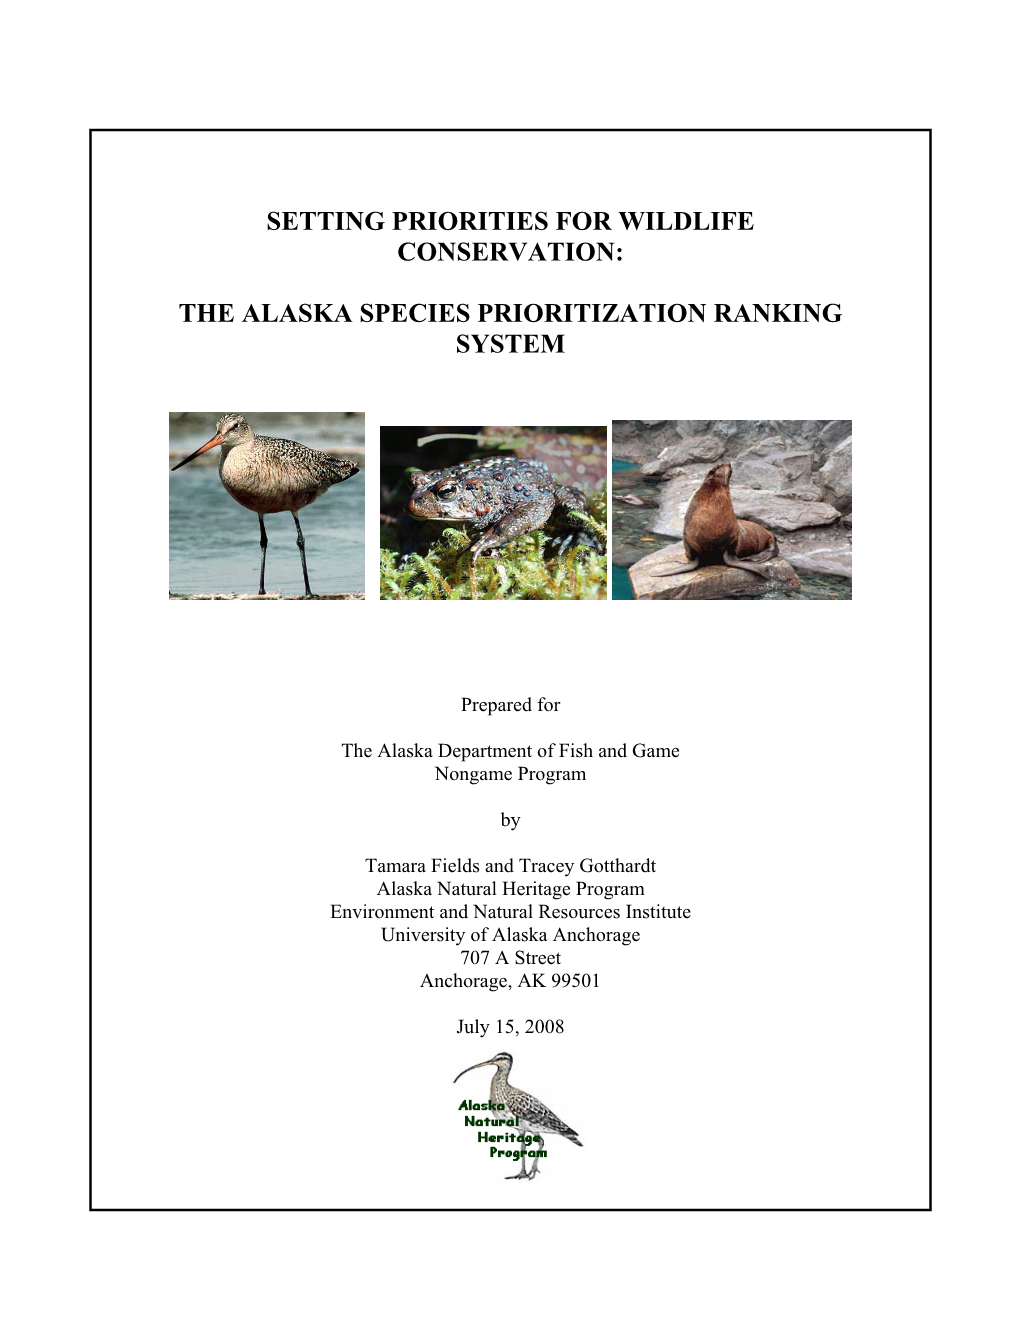 Setting Priorities for Wildlife Conservation: the Alaska Species